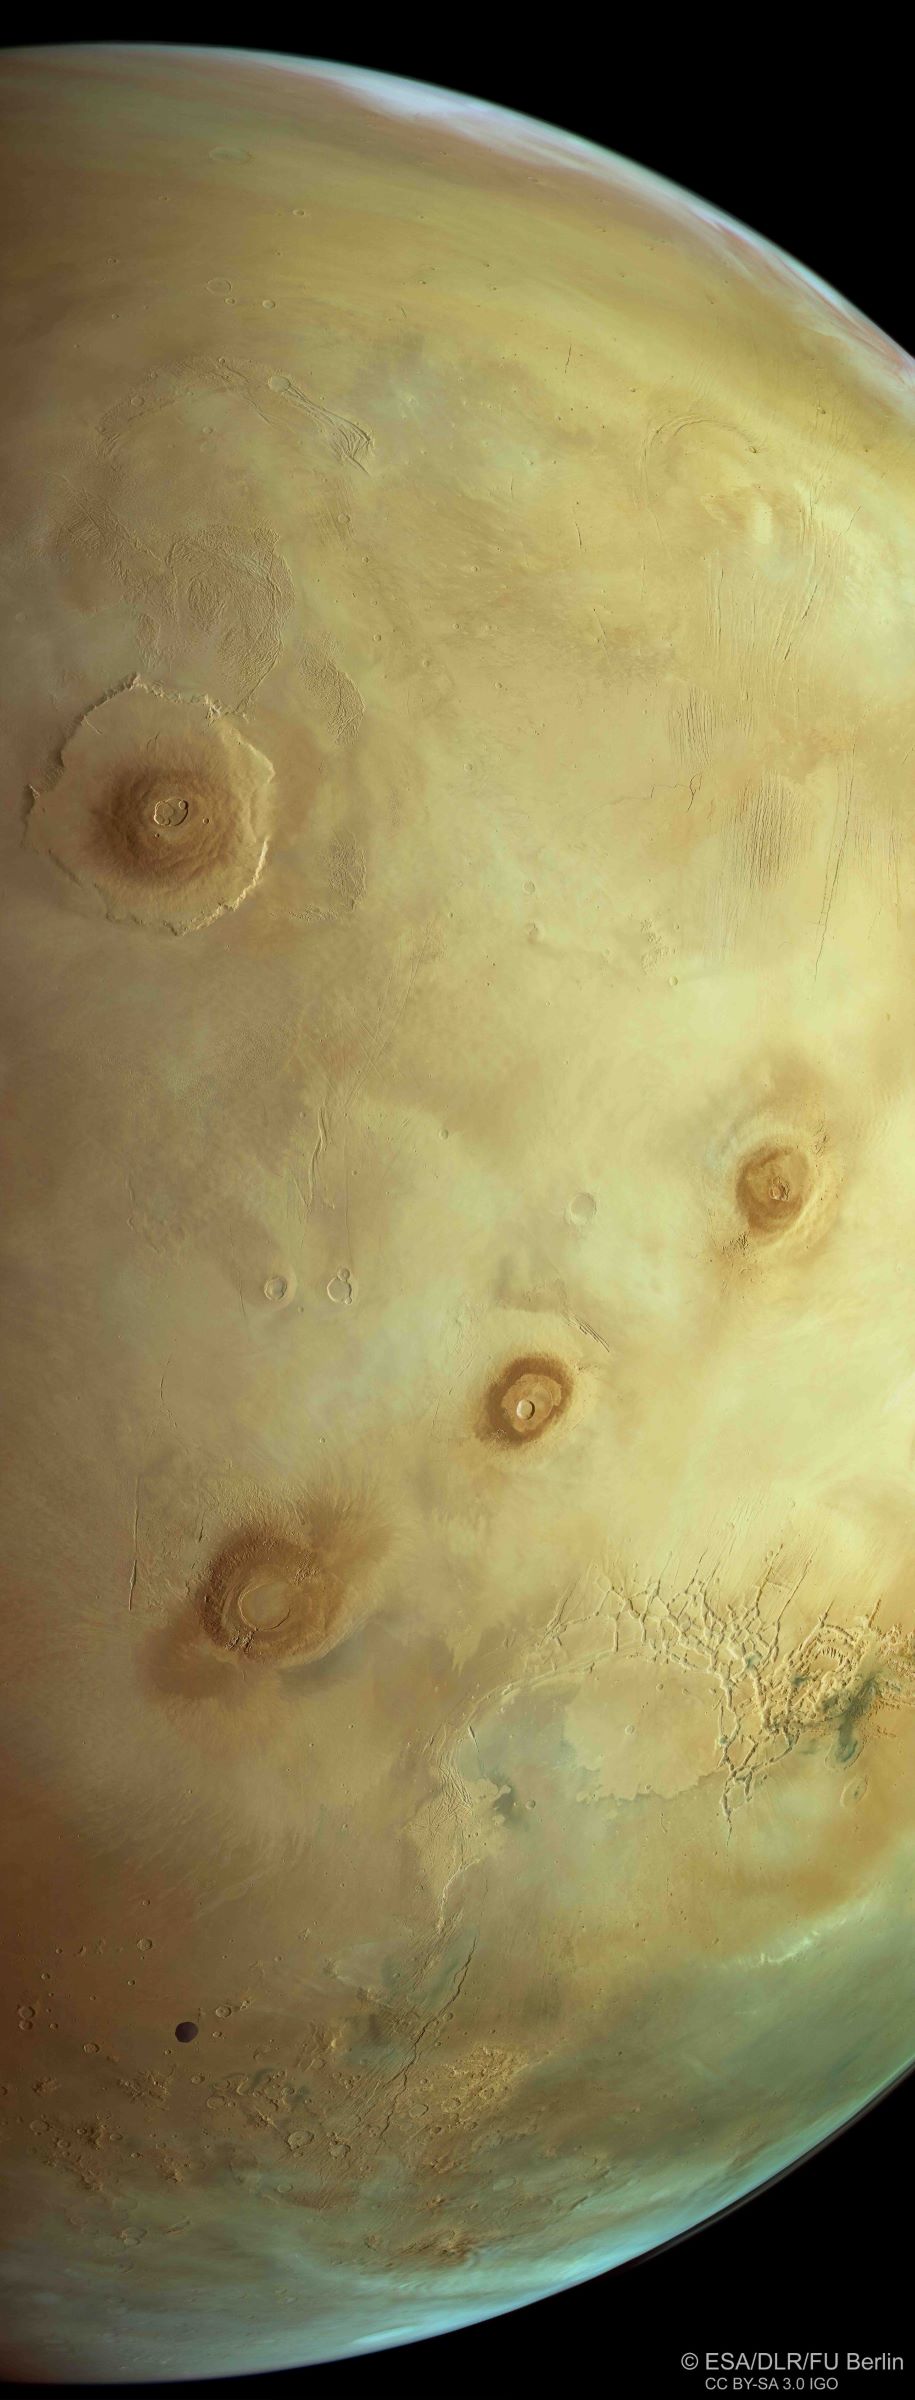 A spectacular high-altitude view of the Red Planet, captured by Mars Express